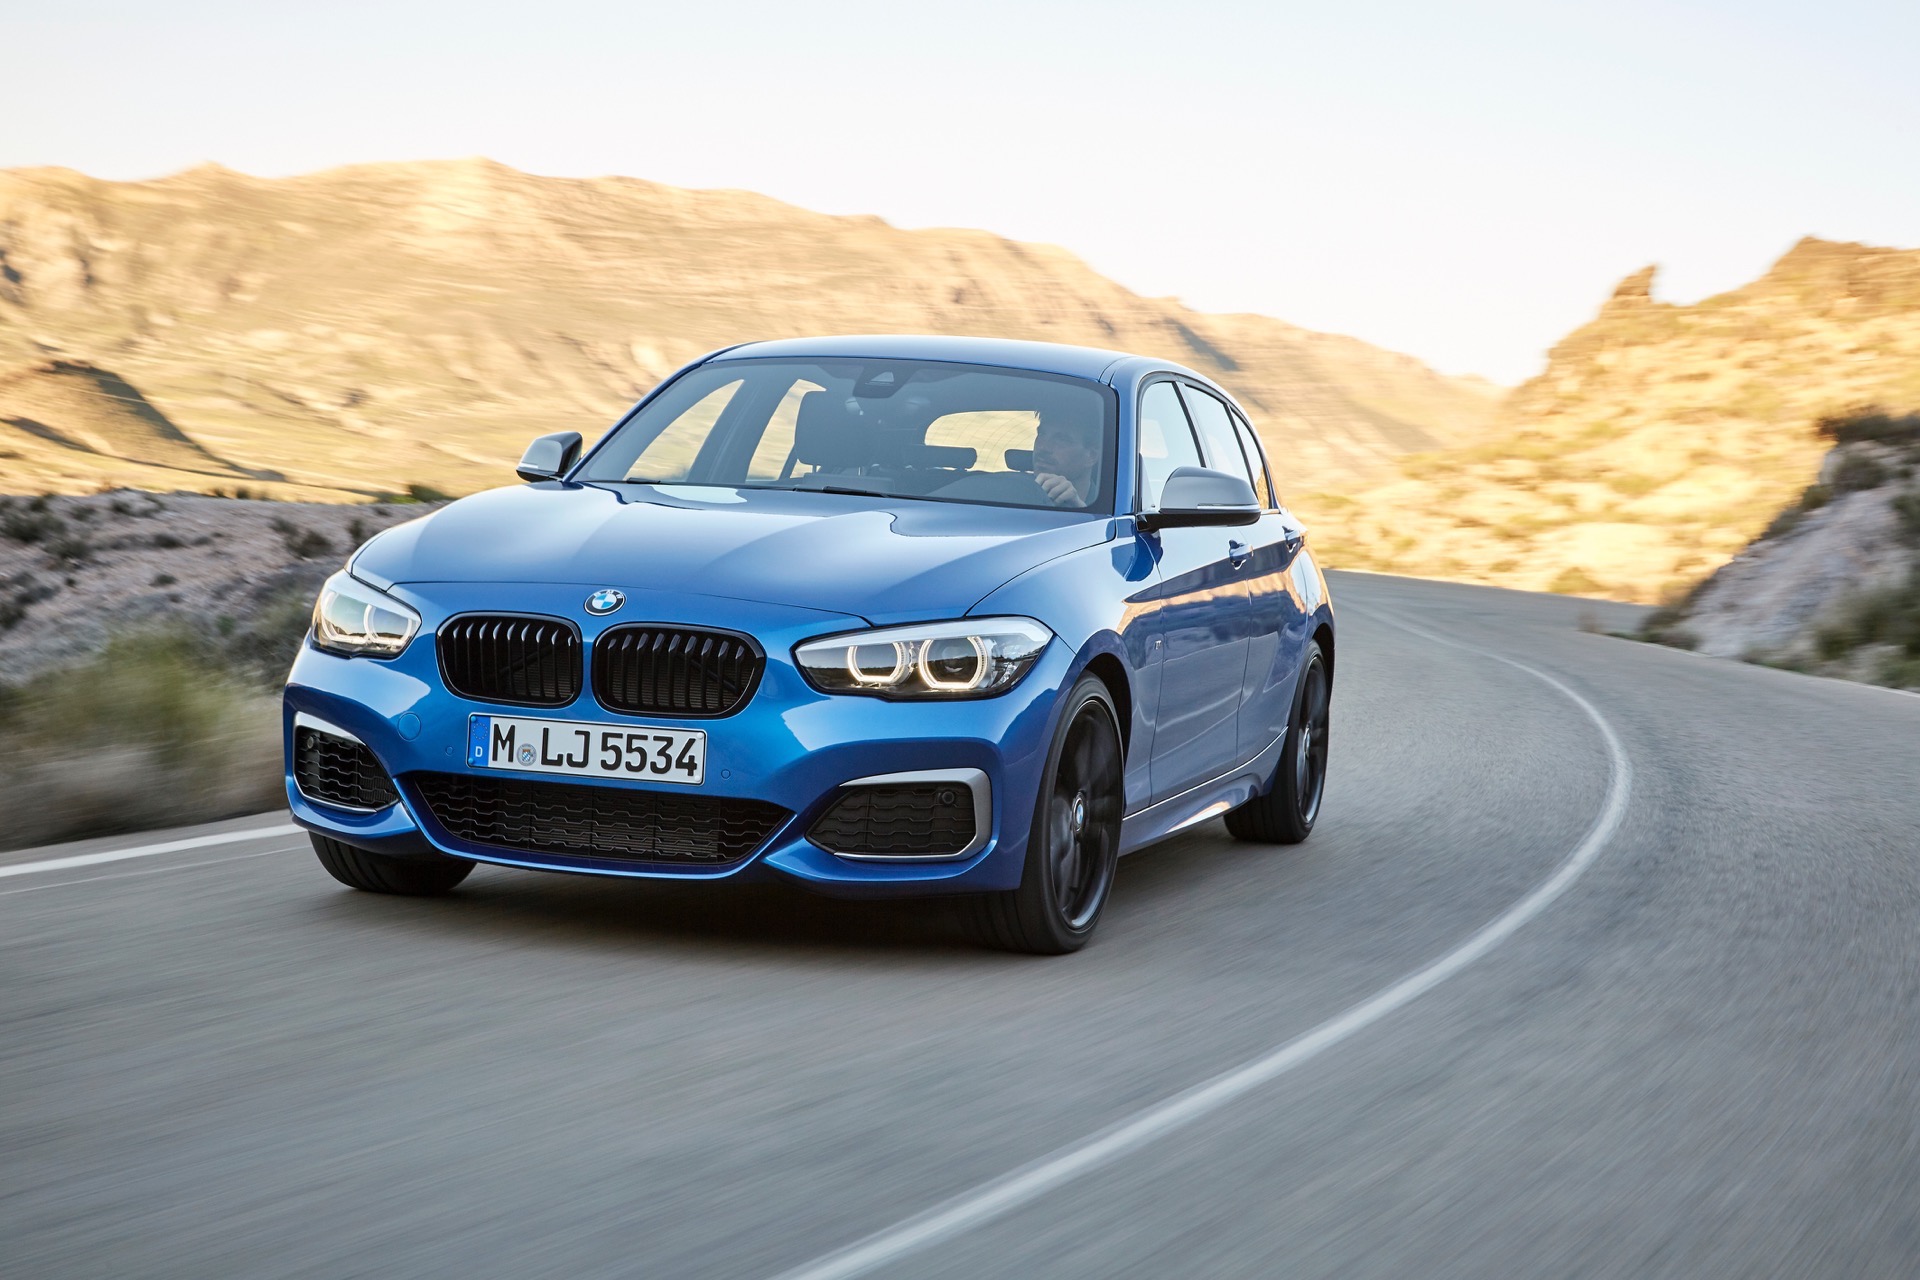 Video Refreshed 2017 BMW 1 Series Official Launch Film